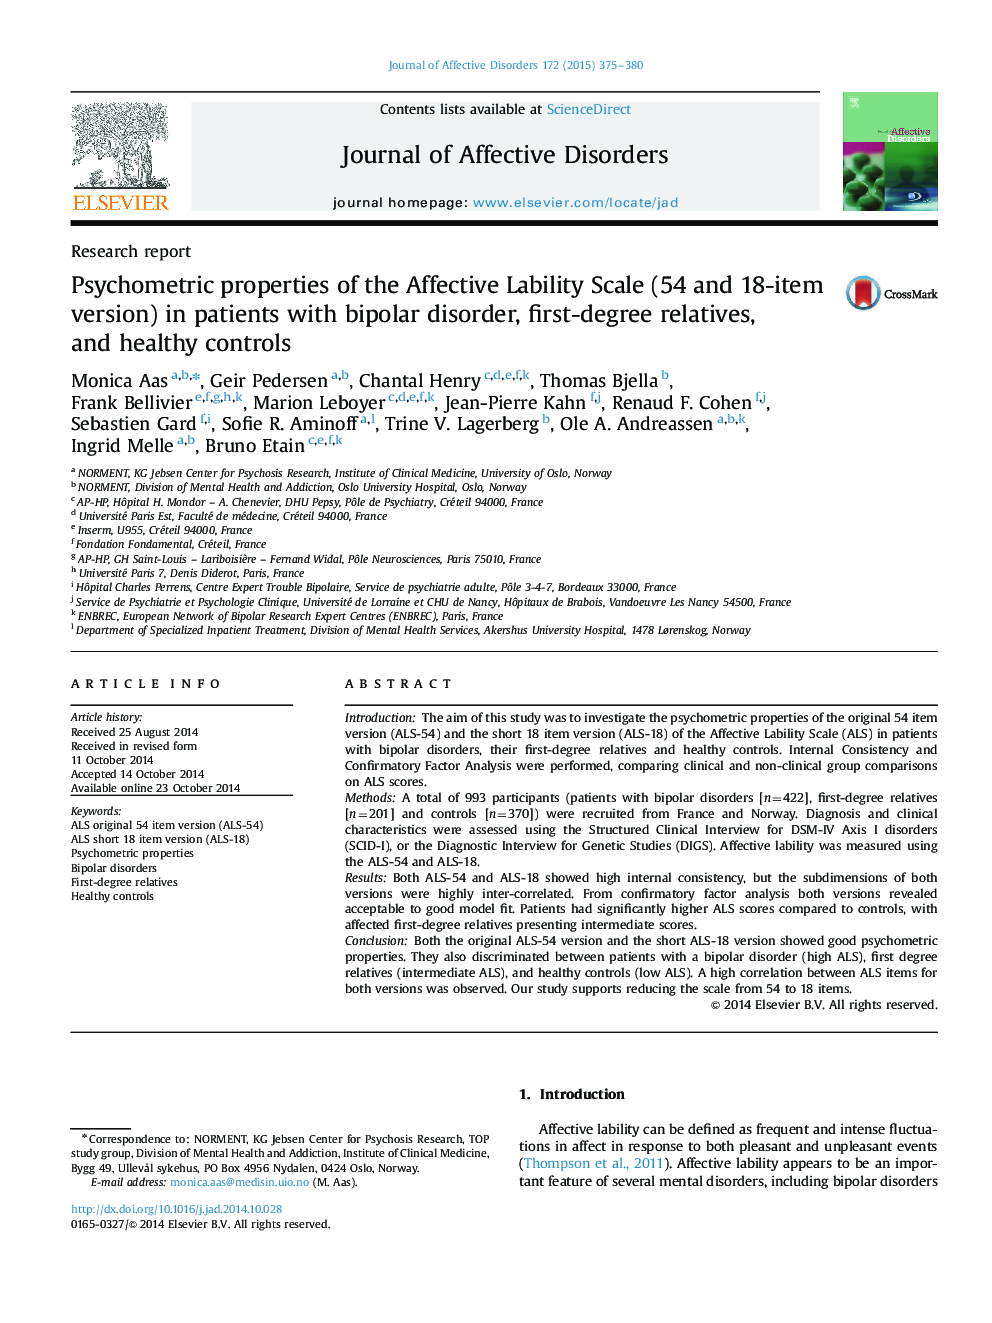 Psychometric properties of the Affective Lability Scale (54 and 18-item version) in patients with bipolar disorder, first-degree relatives, and healthy controls